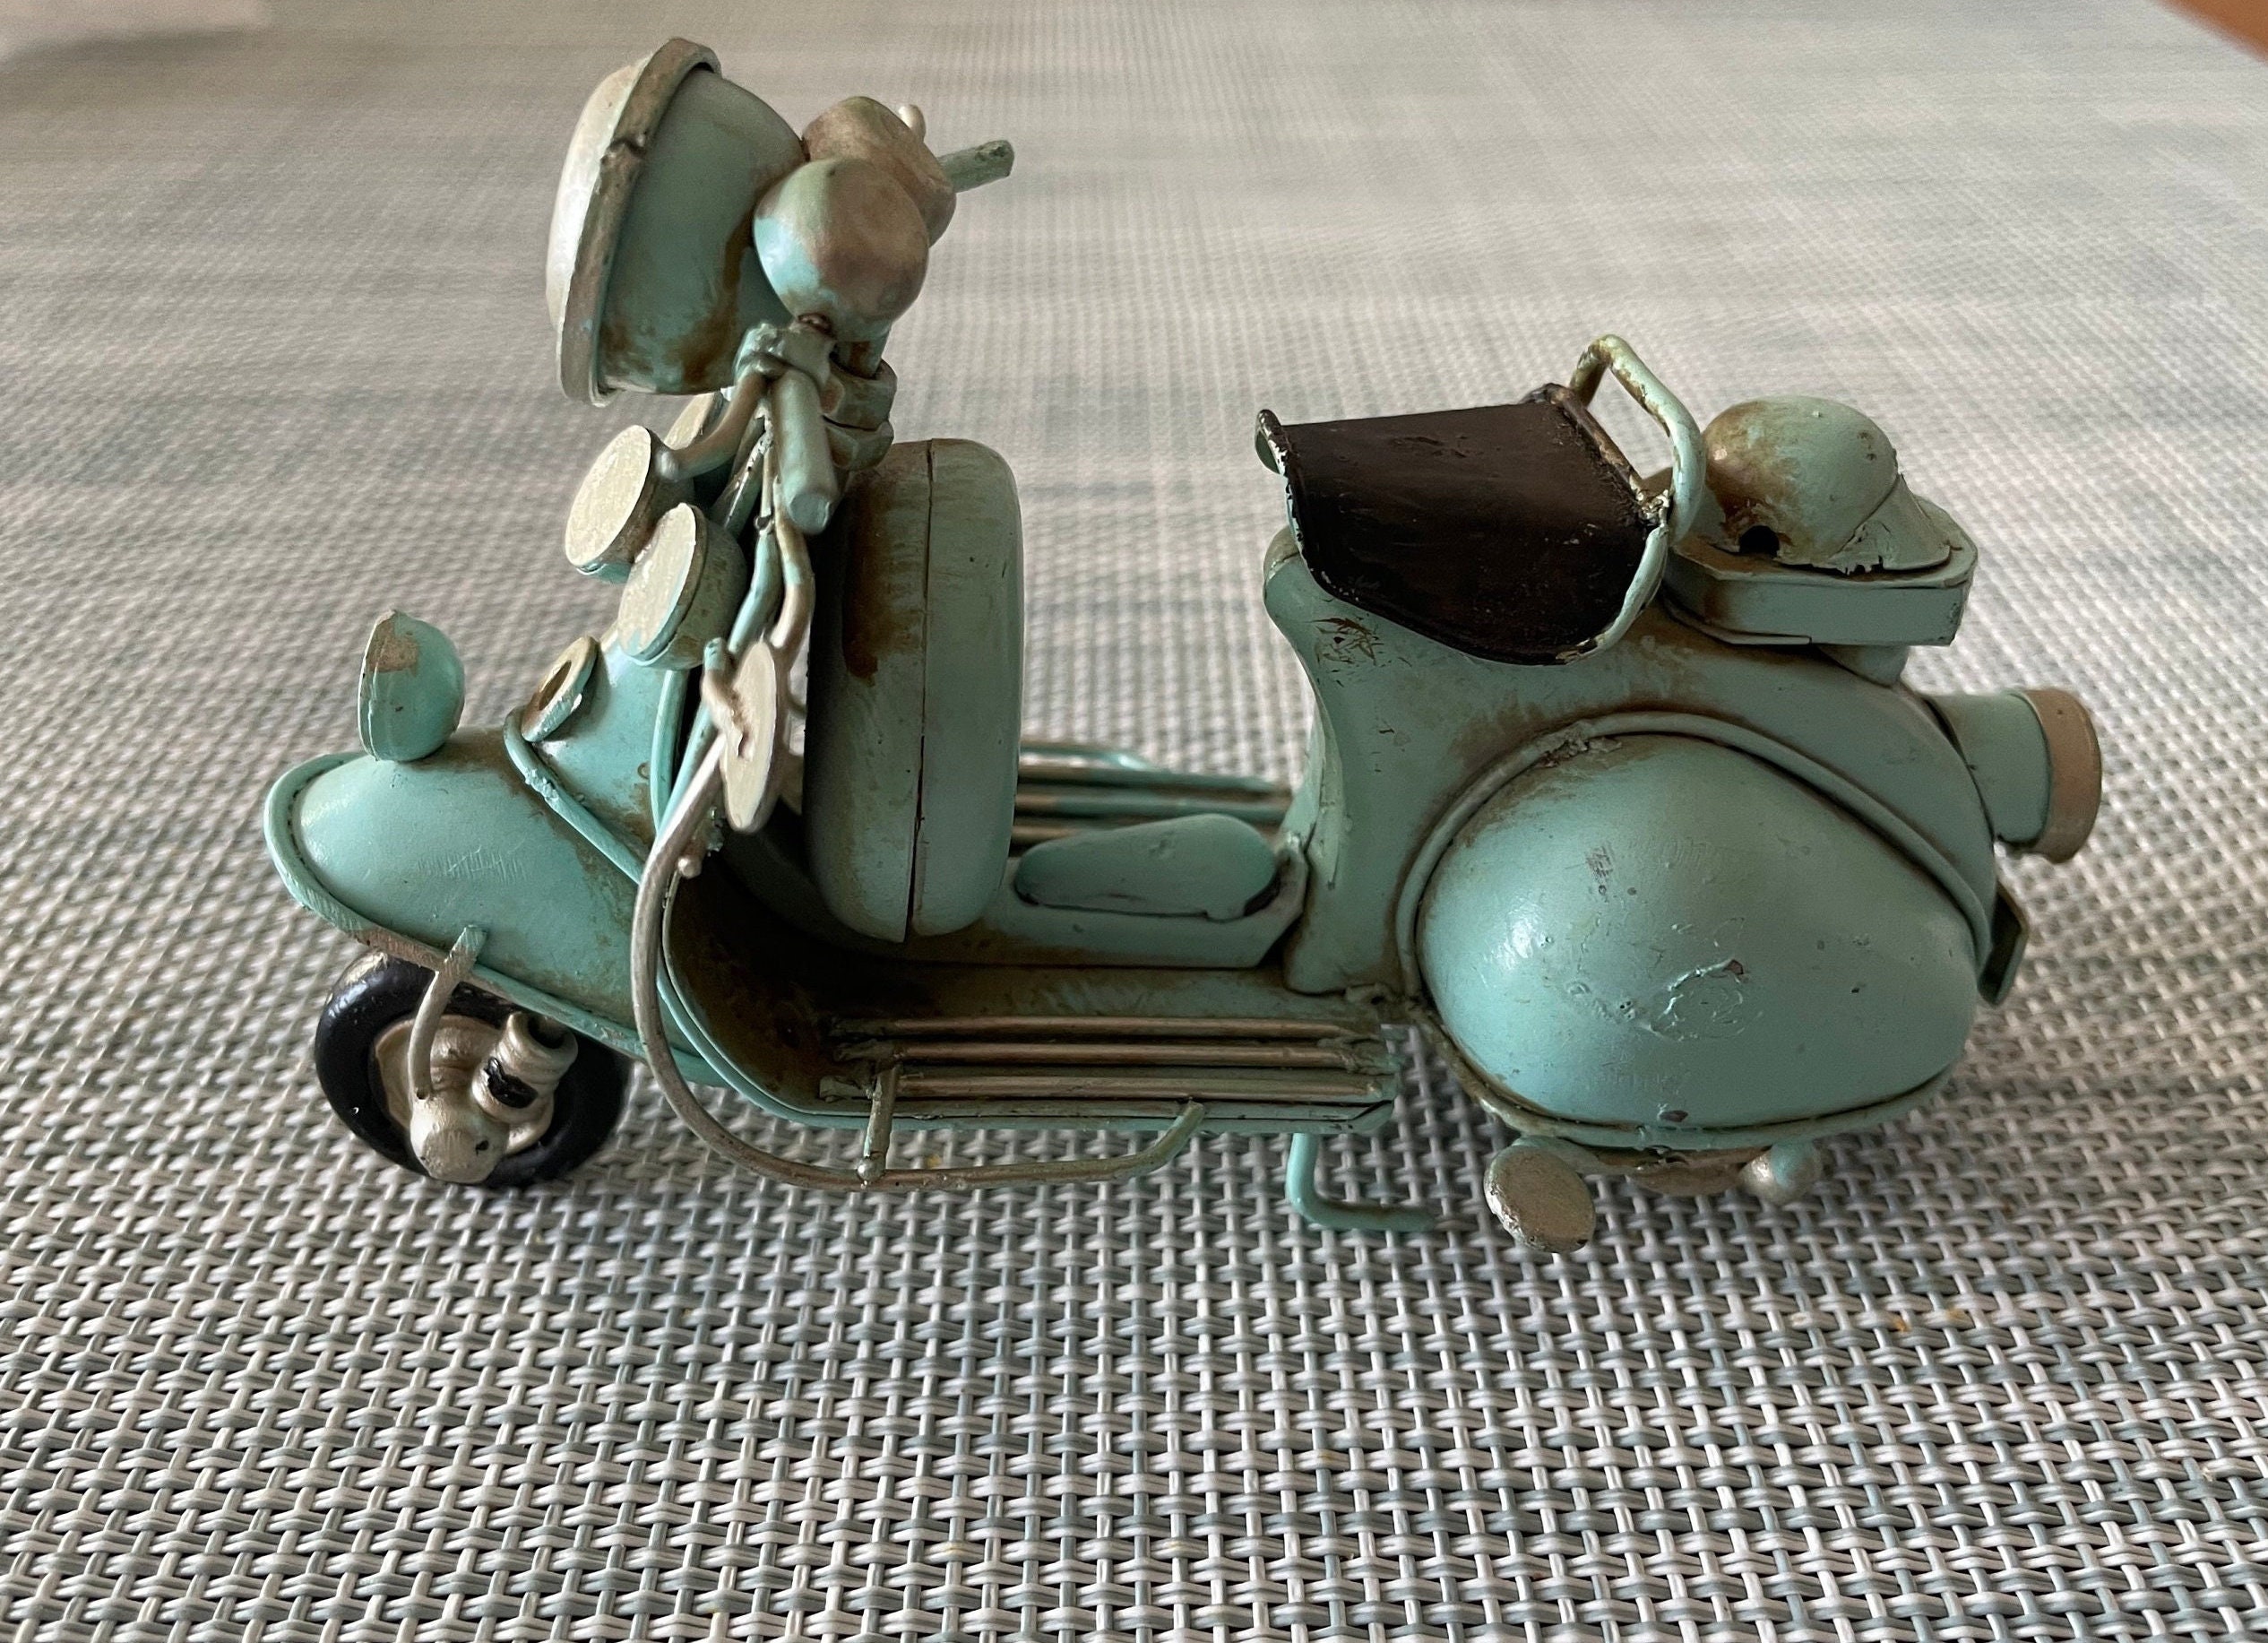 Vintage Motorcycle Scooter Miniature Model Stock Photo 573039808